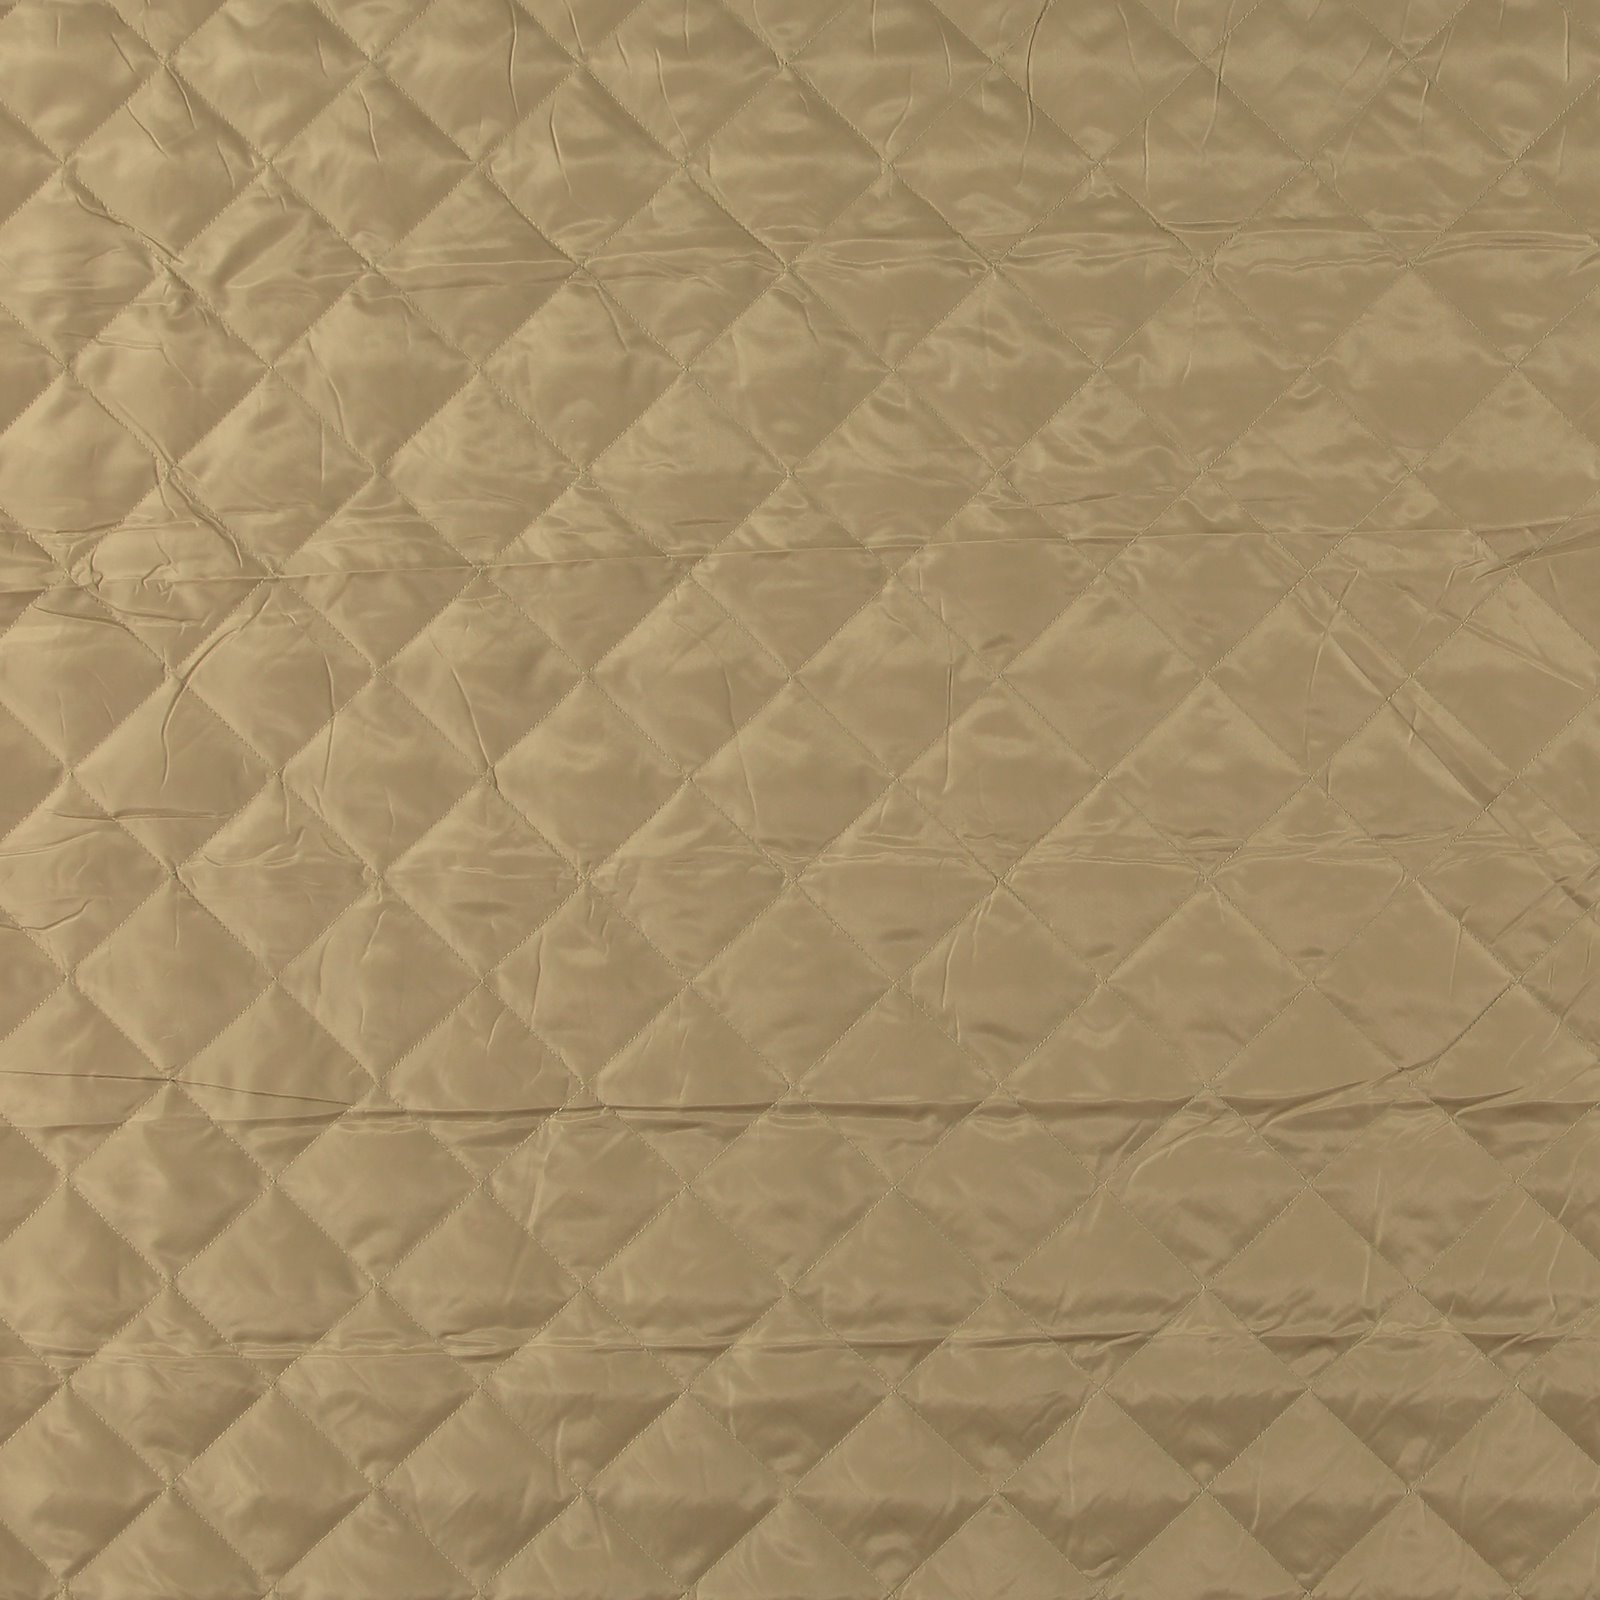 Woven quilt dark beige with lining 920233_pack_sp